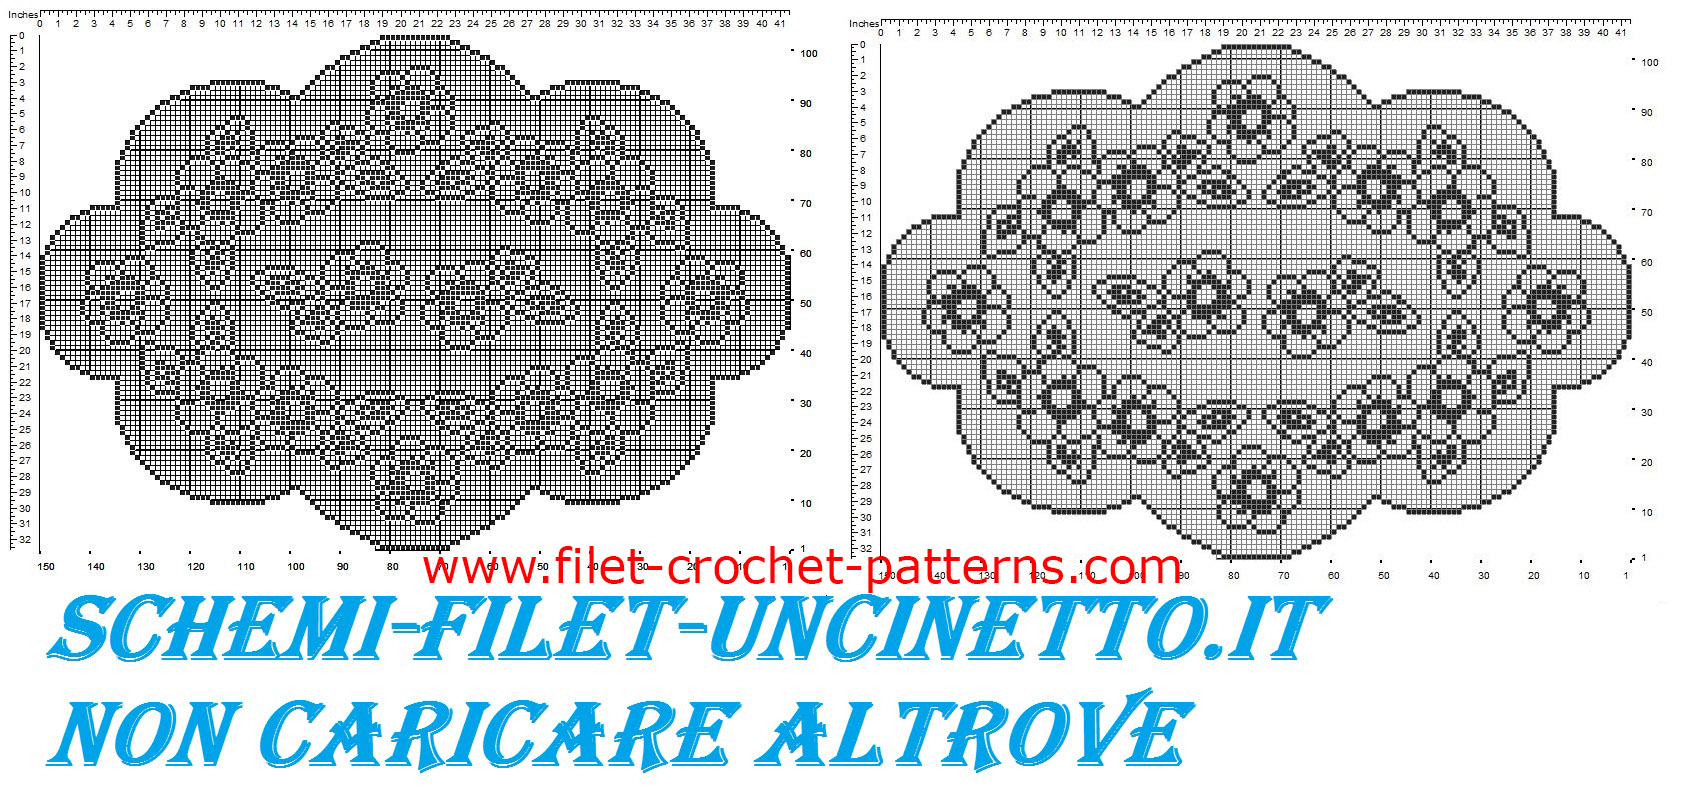 Oval doily flowers and leaves free filet crochet pattern